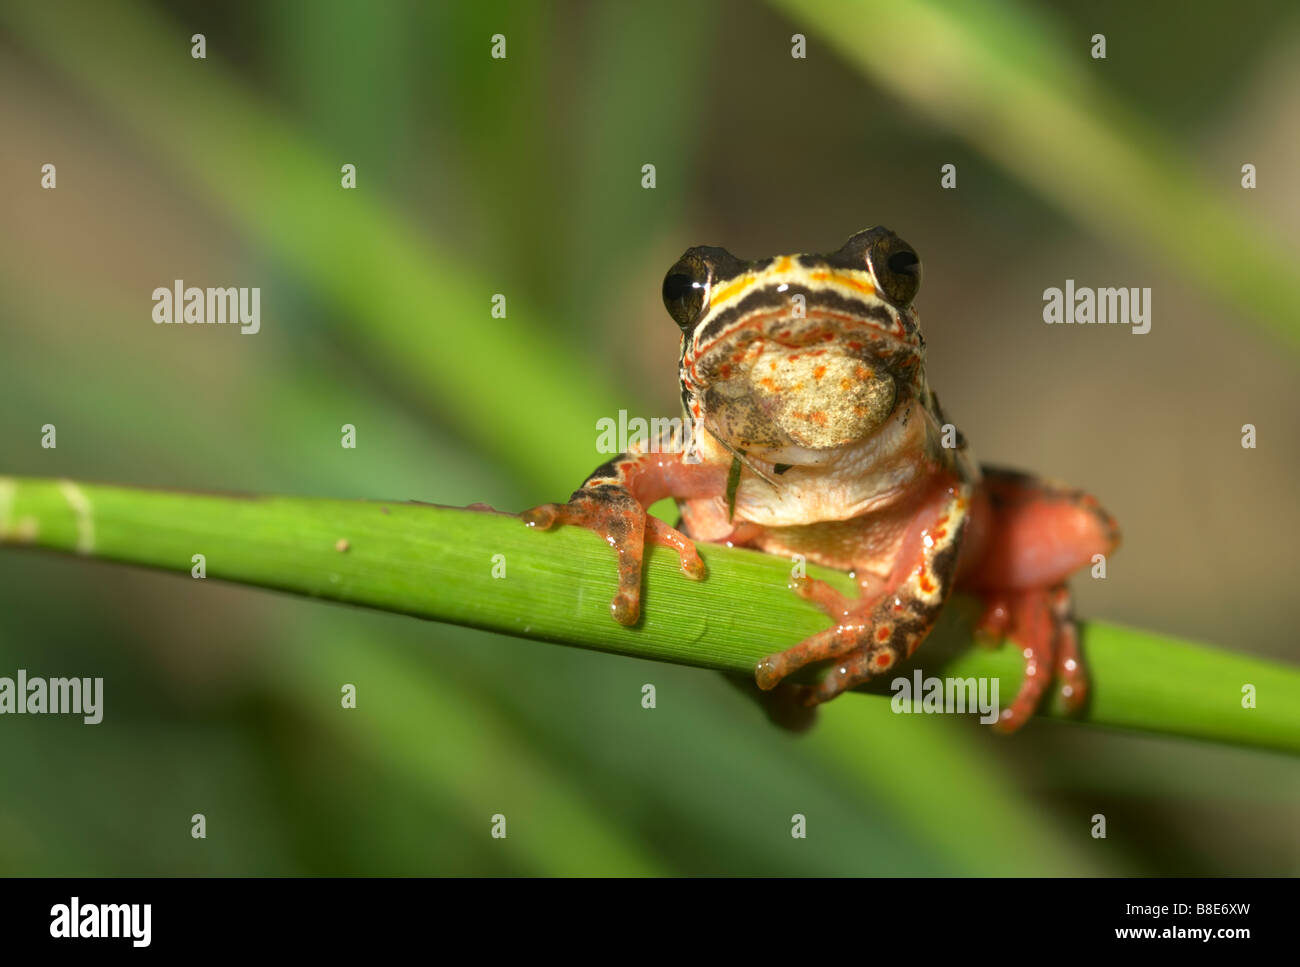 Painted Reed Frog looking at the camera. Pongola, Kwazulu Natal Province, South Africa Stock Photo